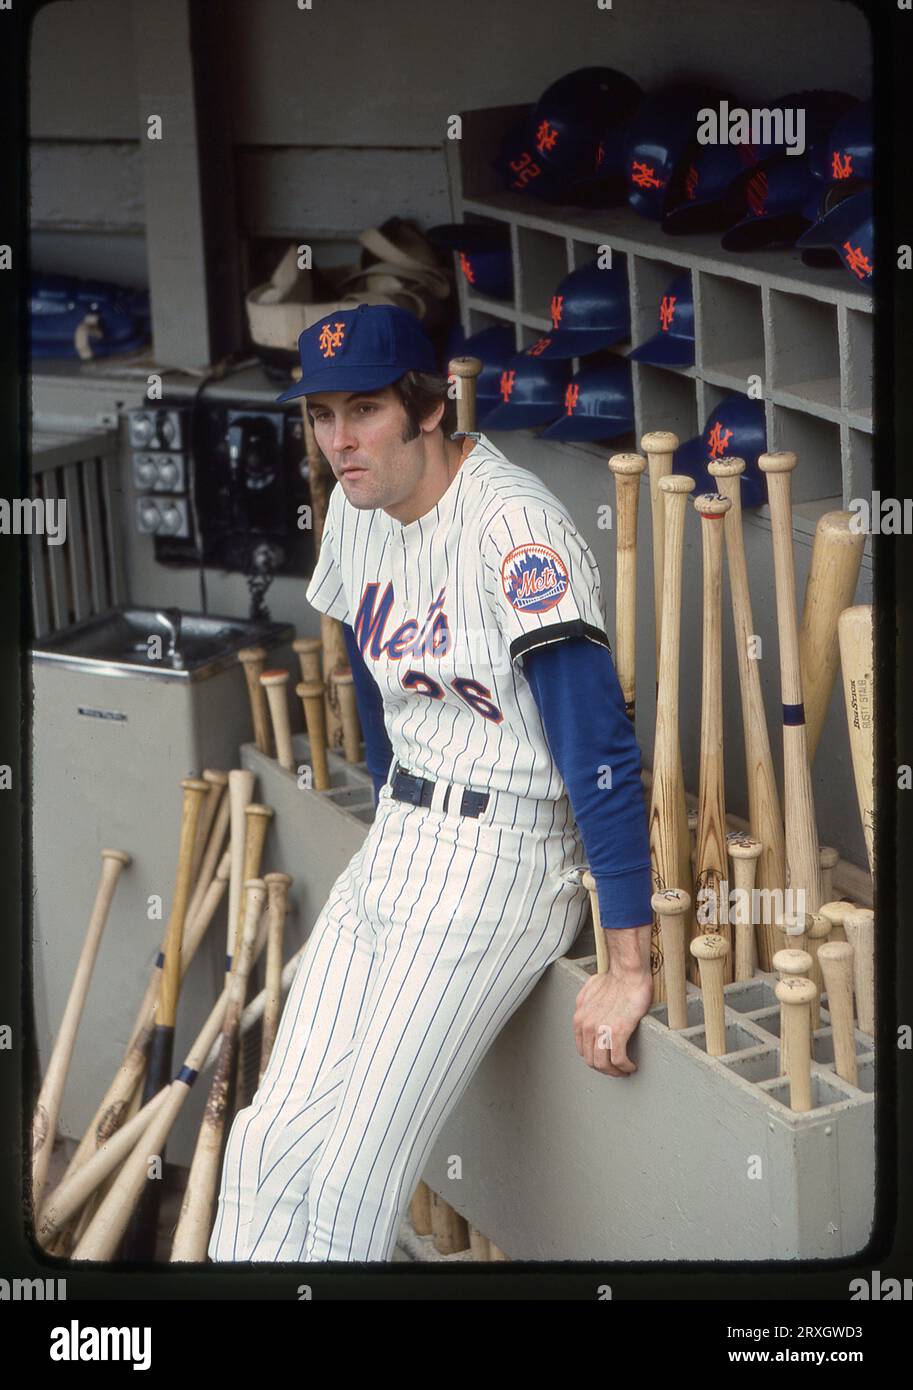 A 1978 photo of New York Mets slugger Dave 'Kong' Kingman in the Mets dugout at Shea Stdium in Queens, New York City. Stock Photo